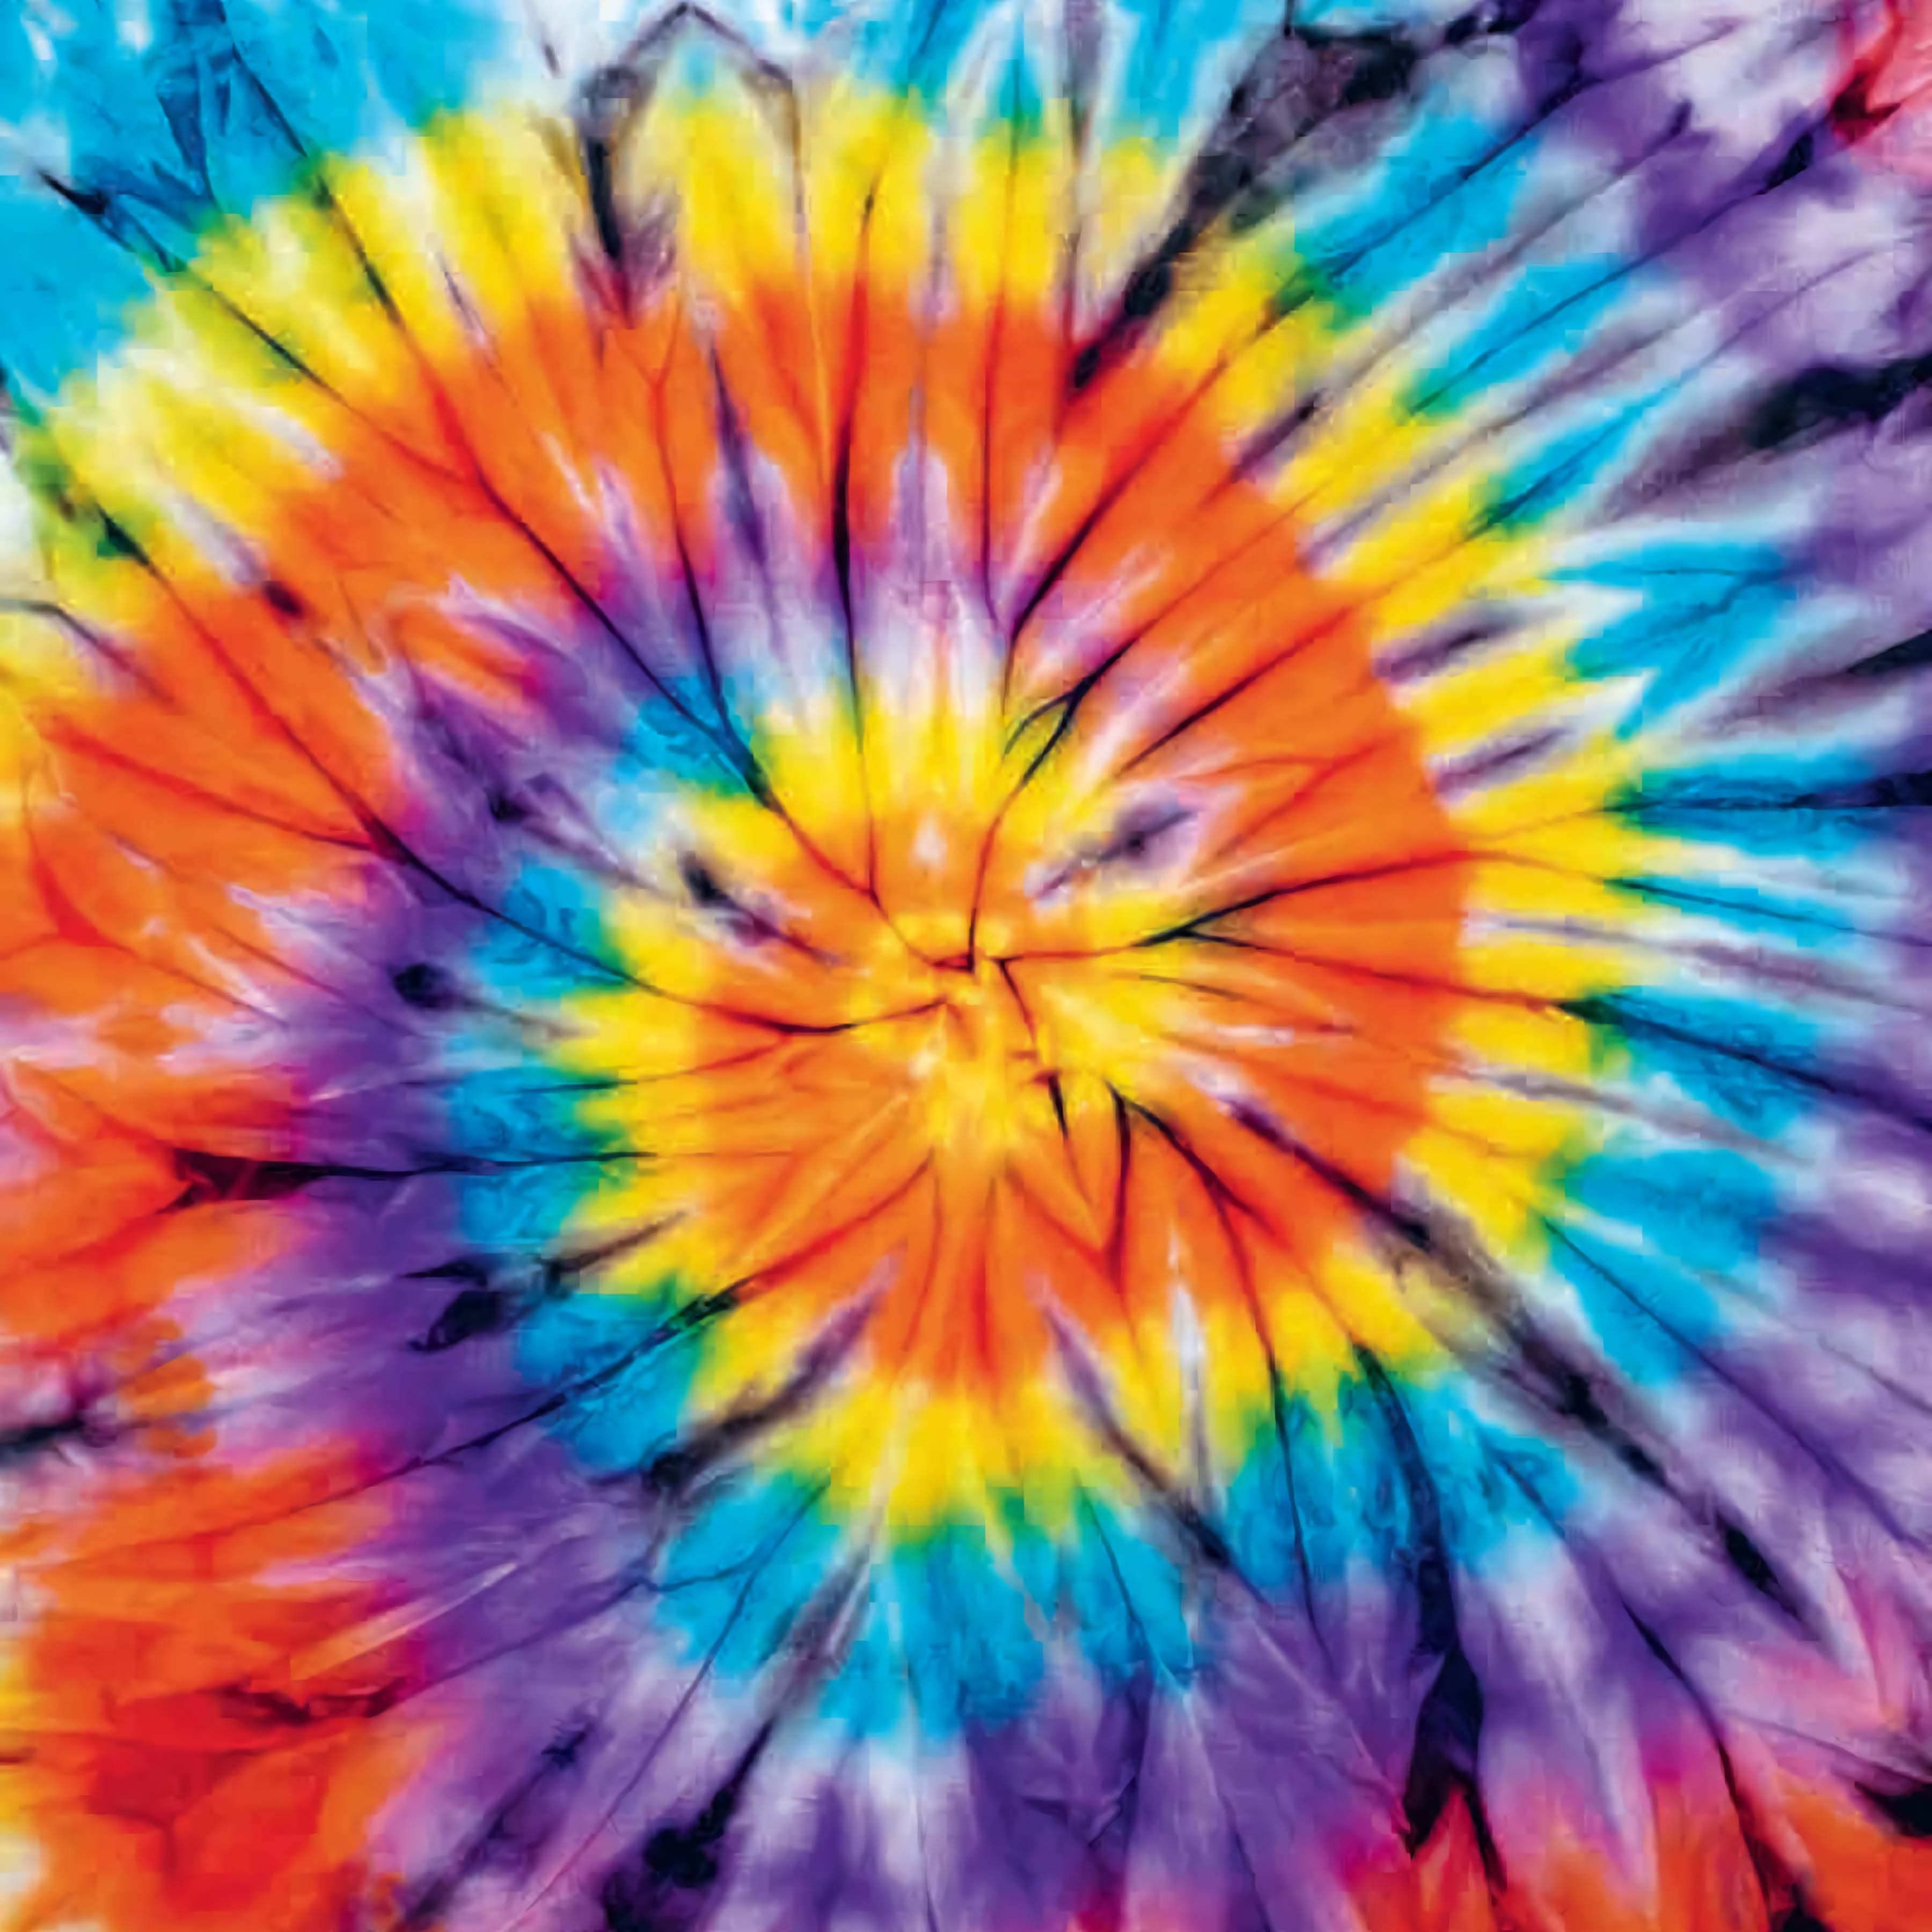 SOLD OUT! SALE! Choose Your Two Favorite Colors! Tie Dye Cotton